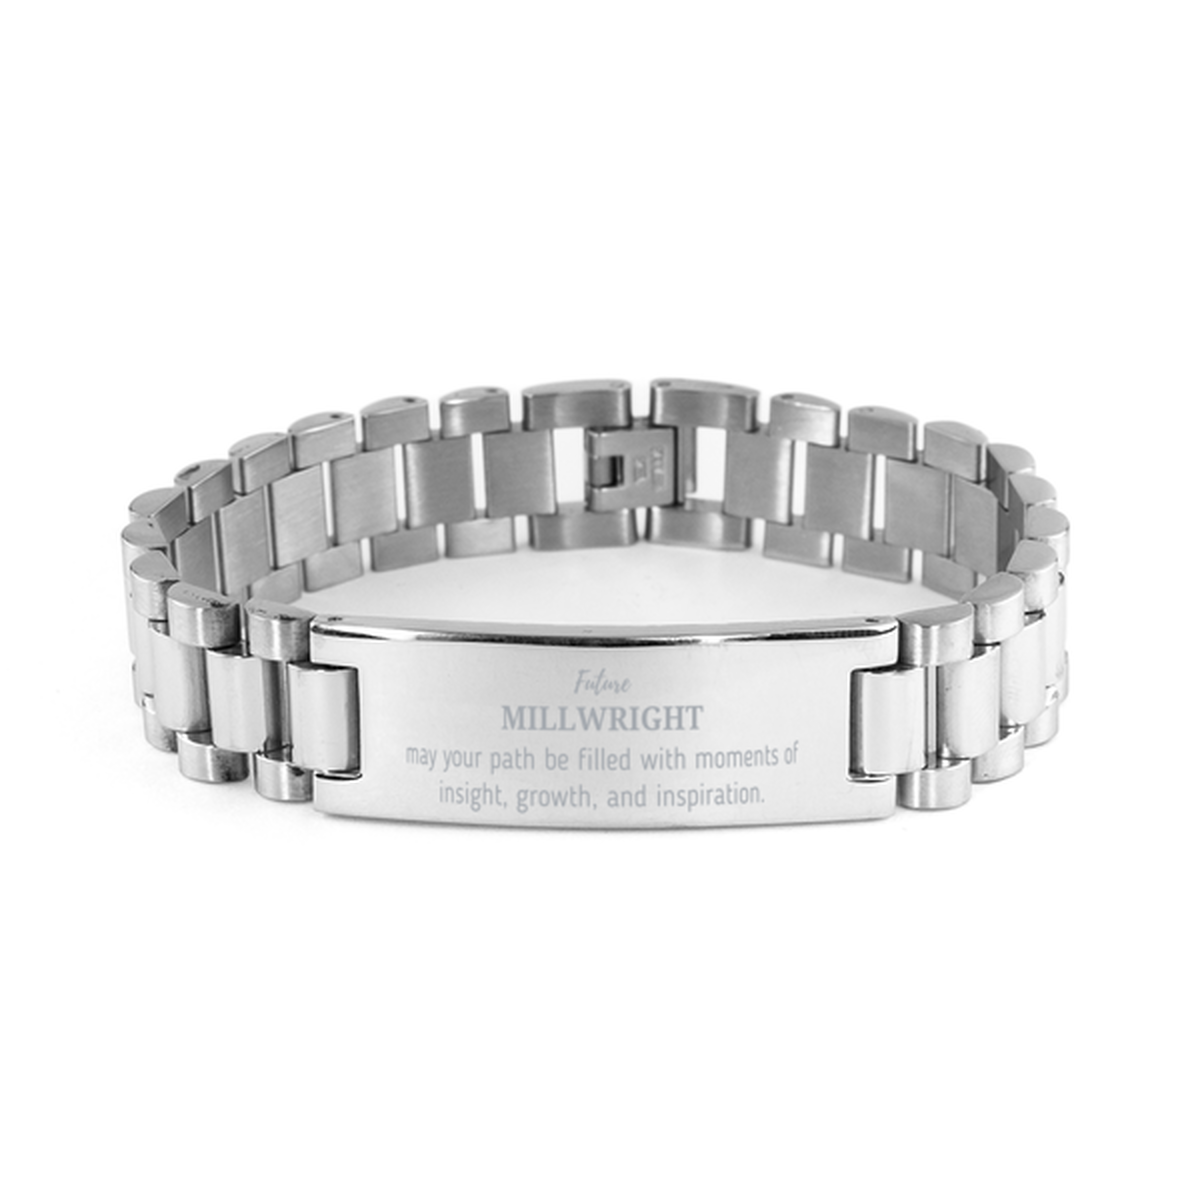 Future Millwright Gifts, May your path be filled with moments of insight, Graduation Gifts for New Millwright, Christmas Unique Ladder Stainless Steel Bracelet For Men, Women, Friends